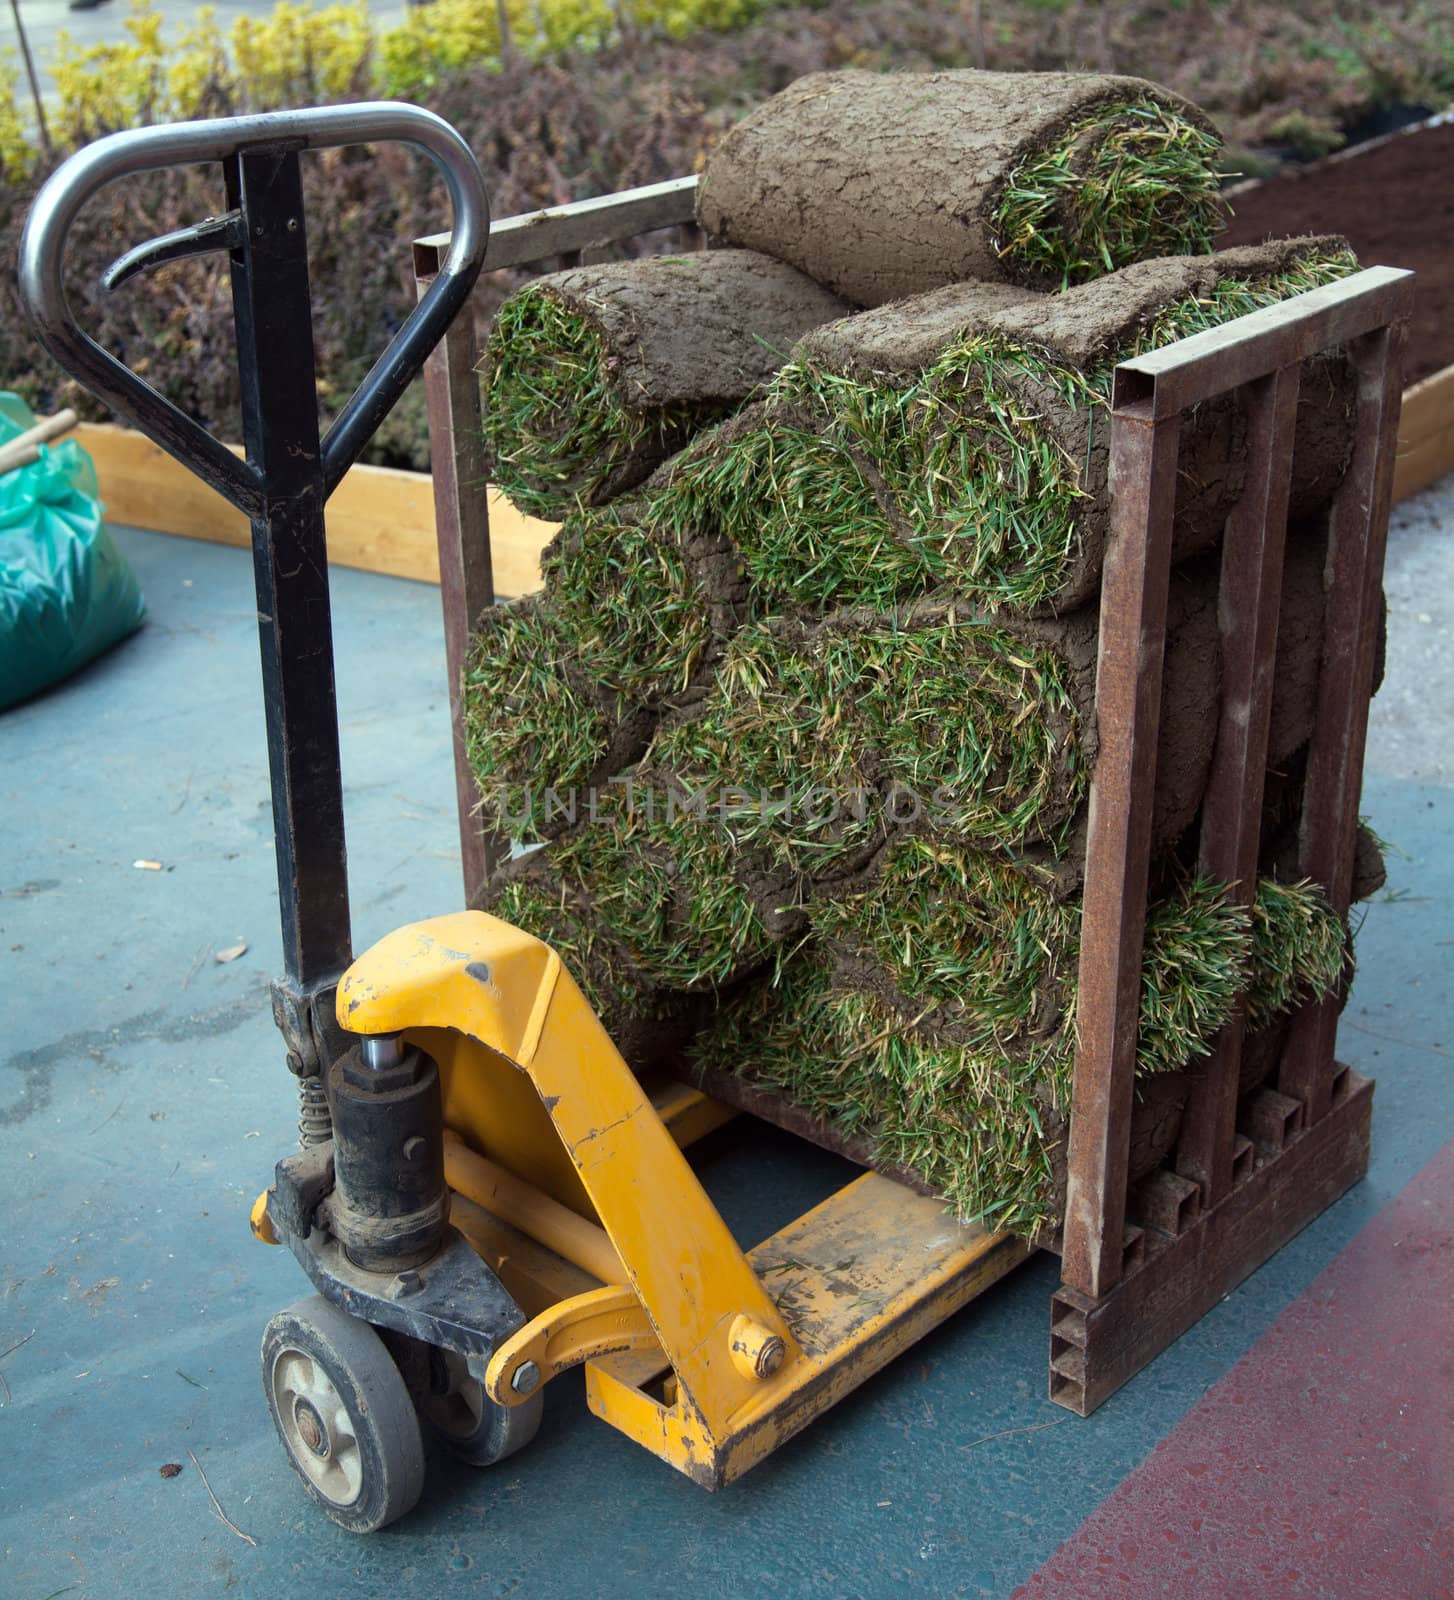 Turf on transport truck by Portokalis